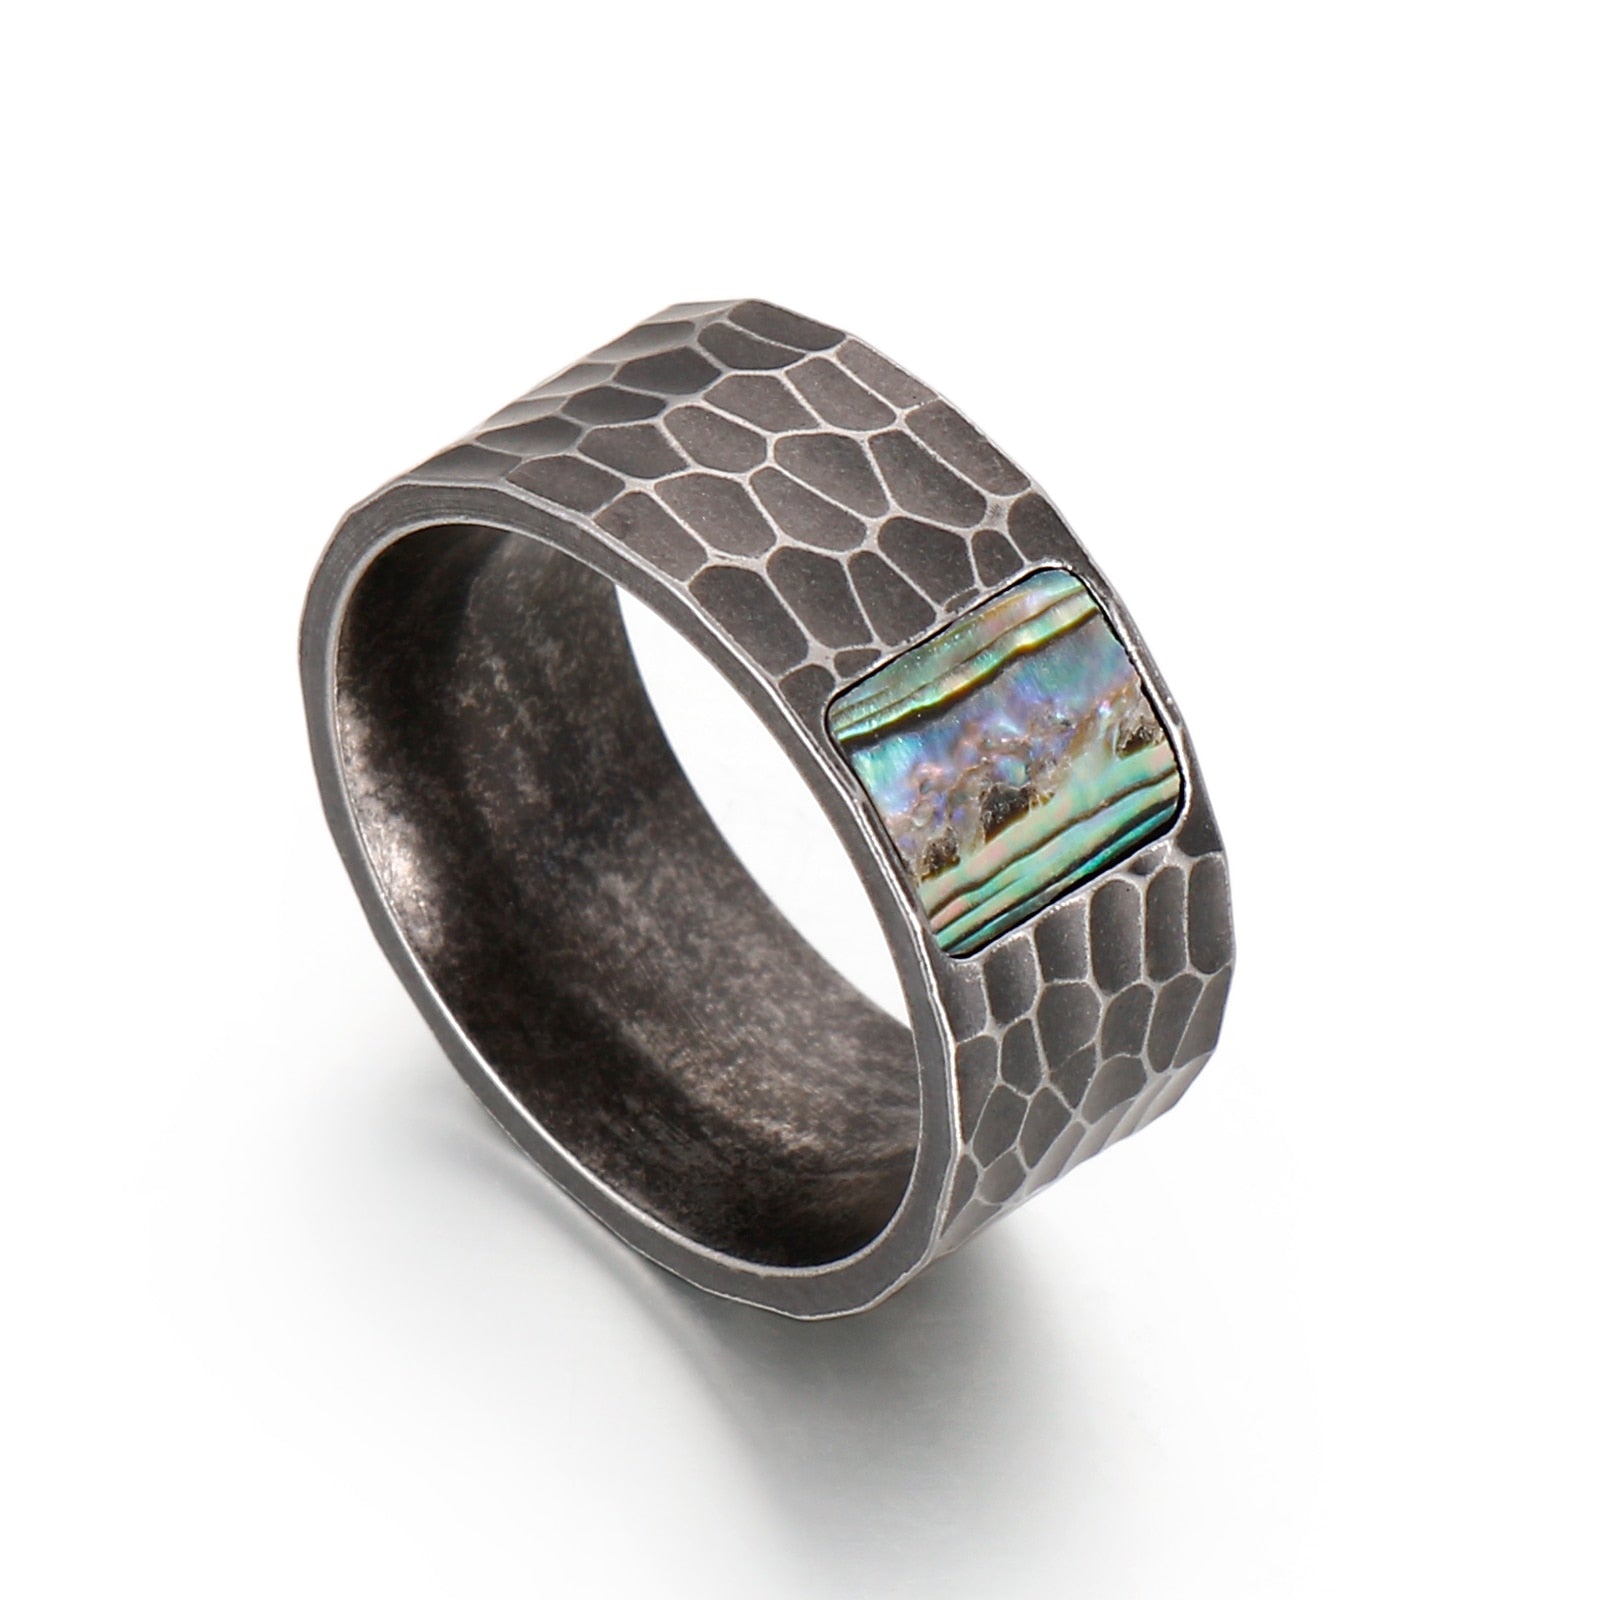 10mm Hammered & Abalone Shell Inlay Men's Ring (2 colors)